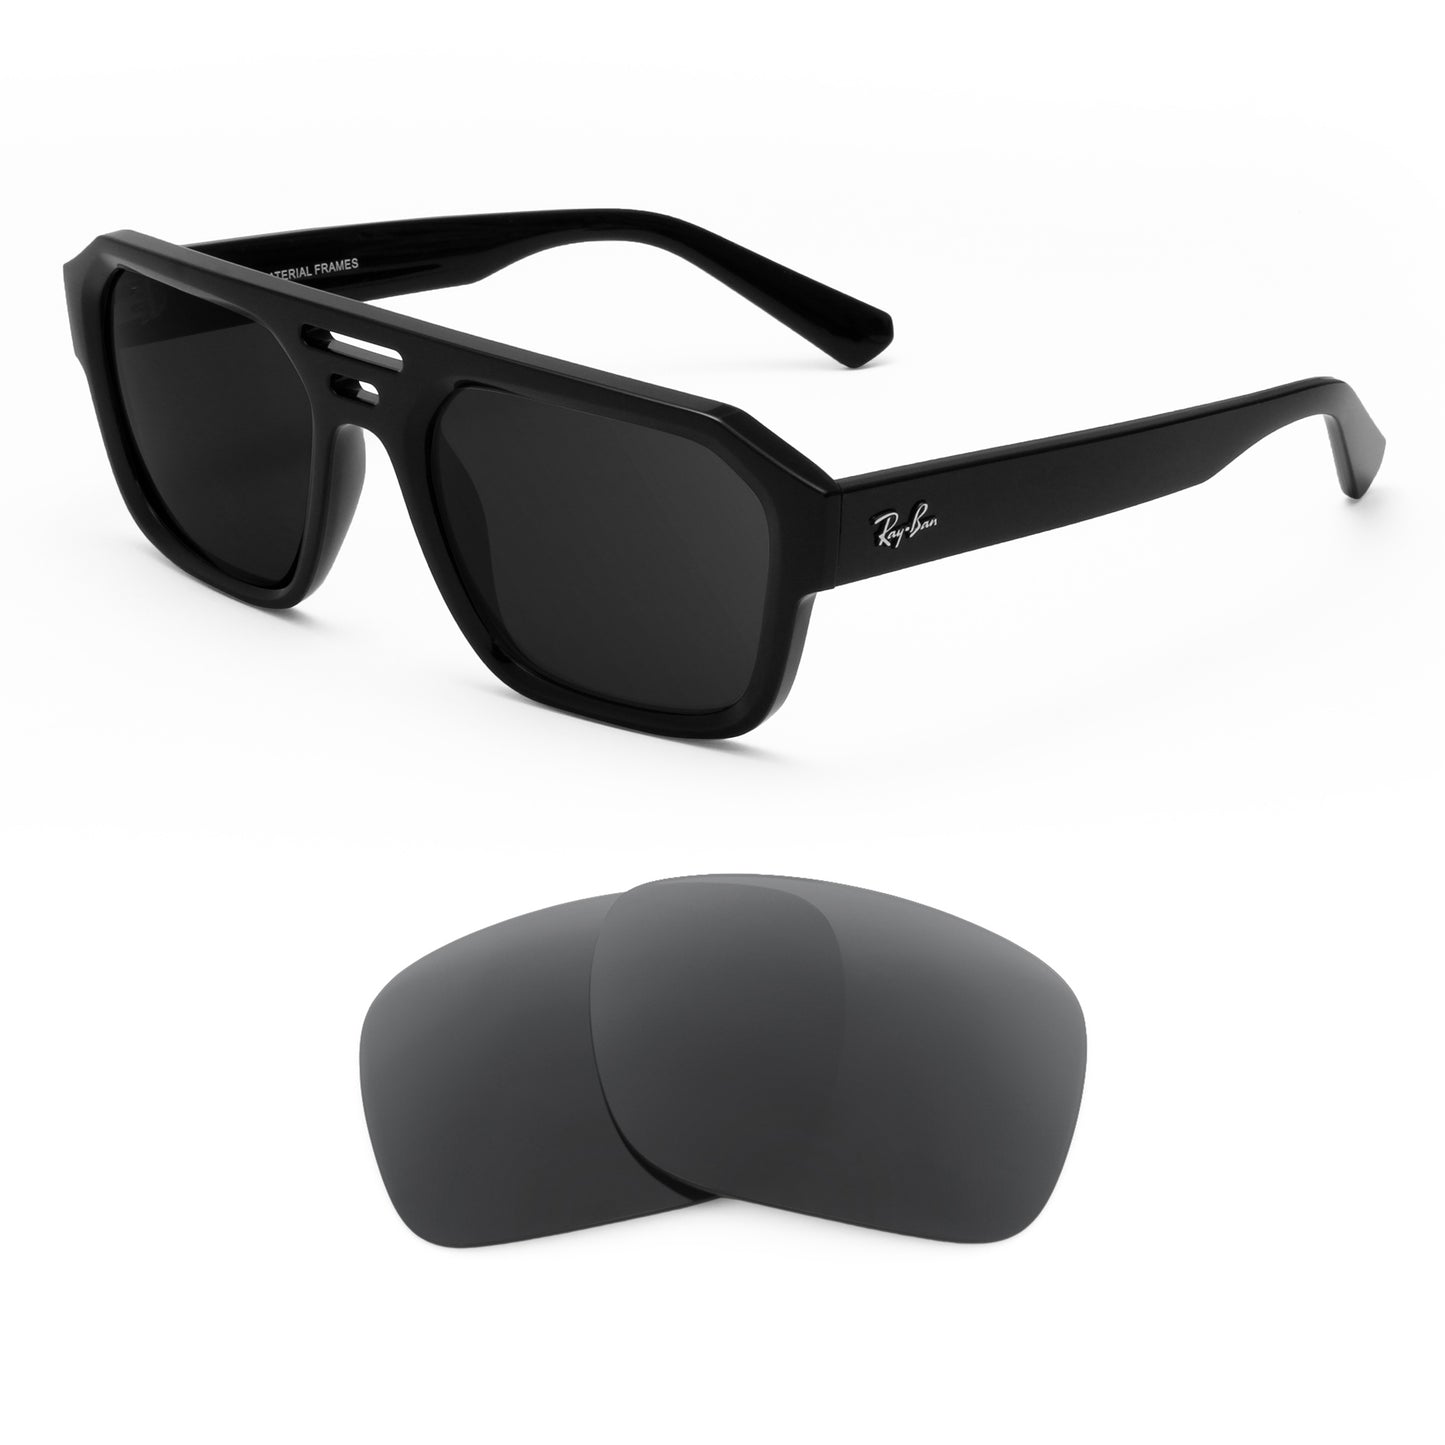 Ray-Ban Corrigan sunglasses with replacement lenses